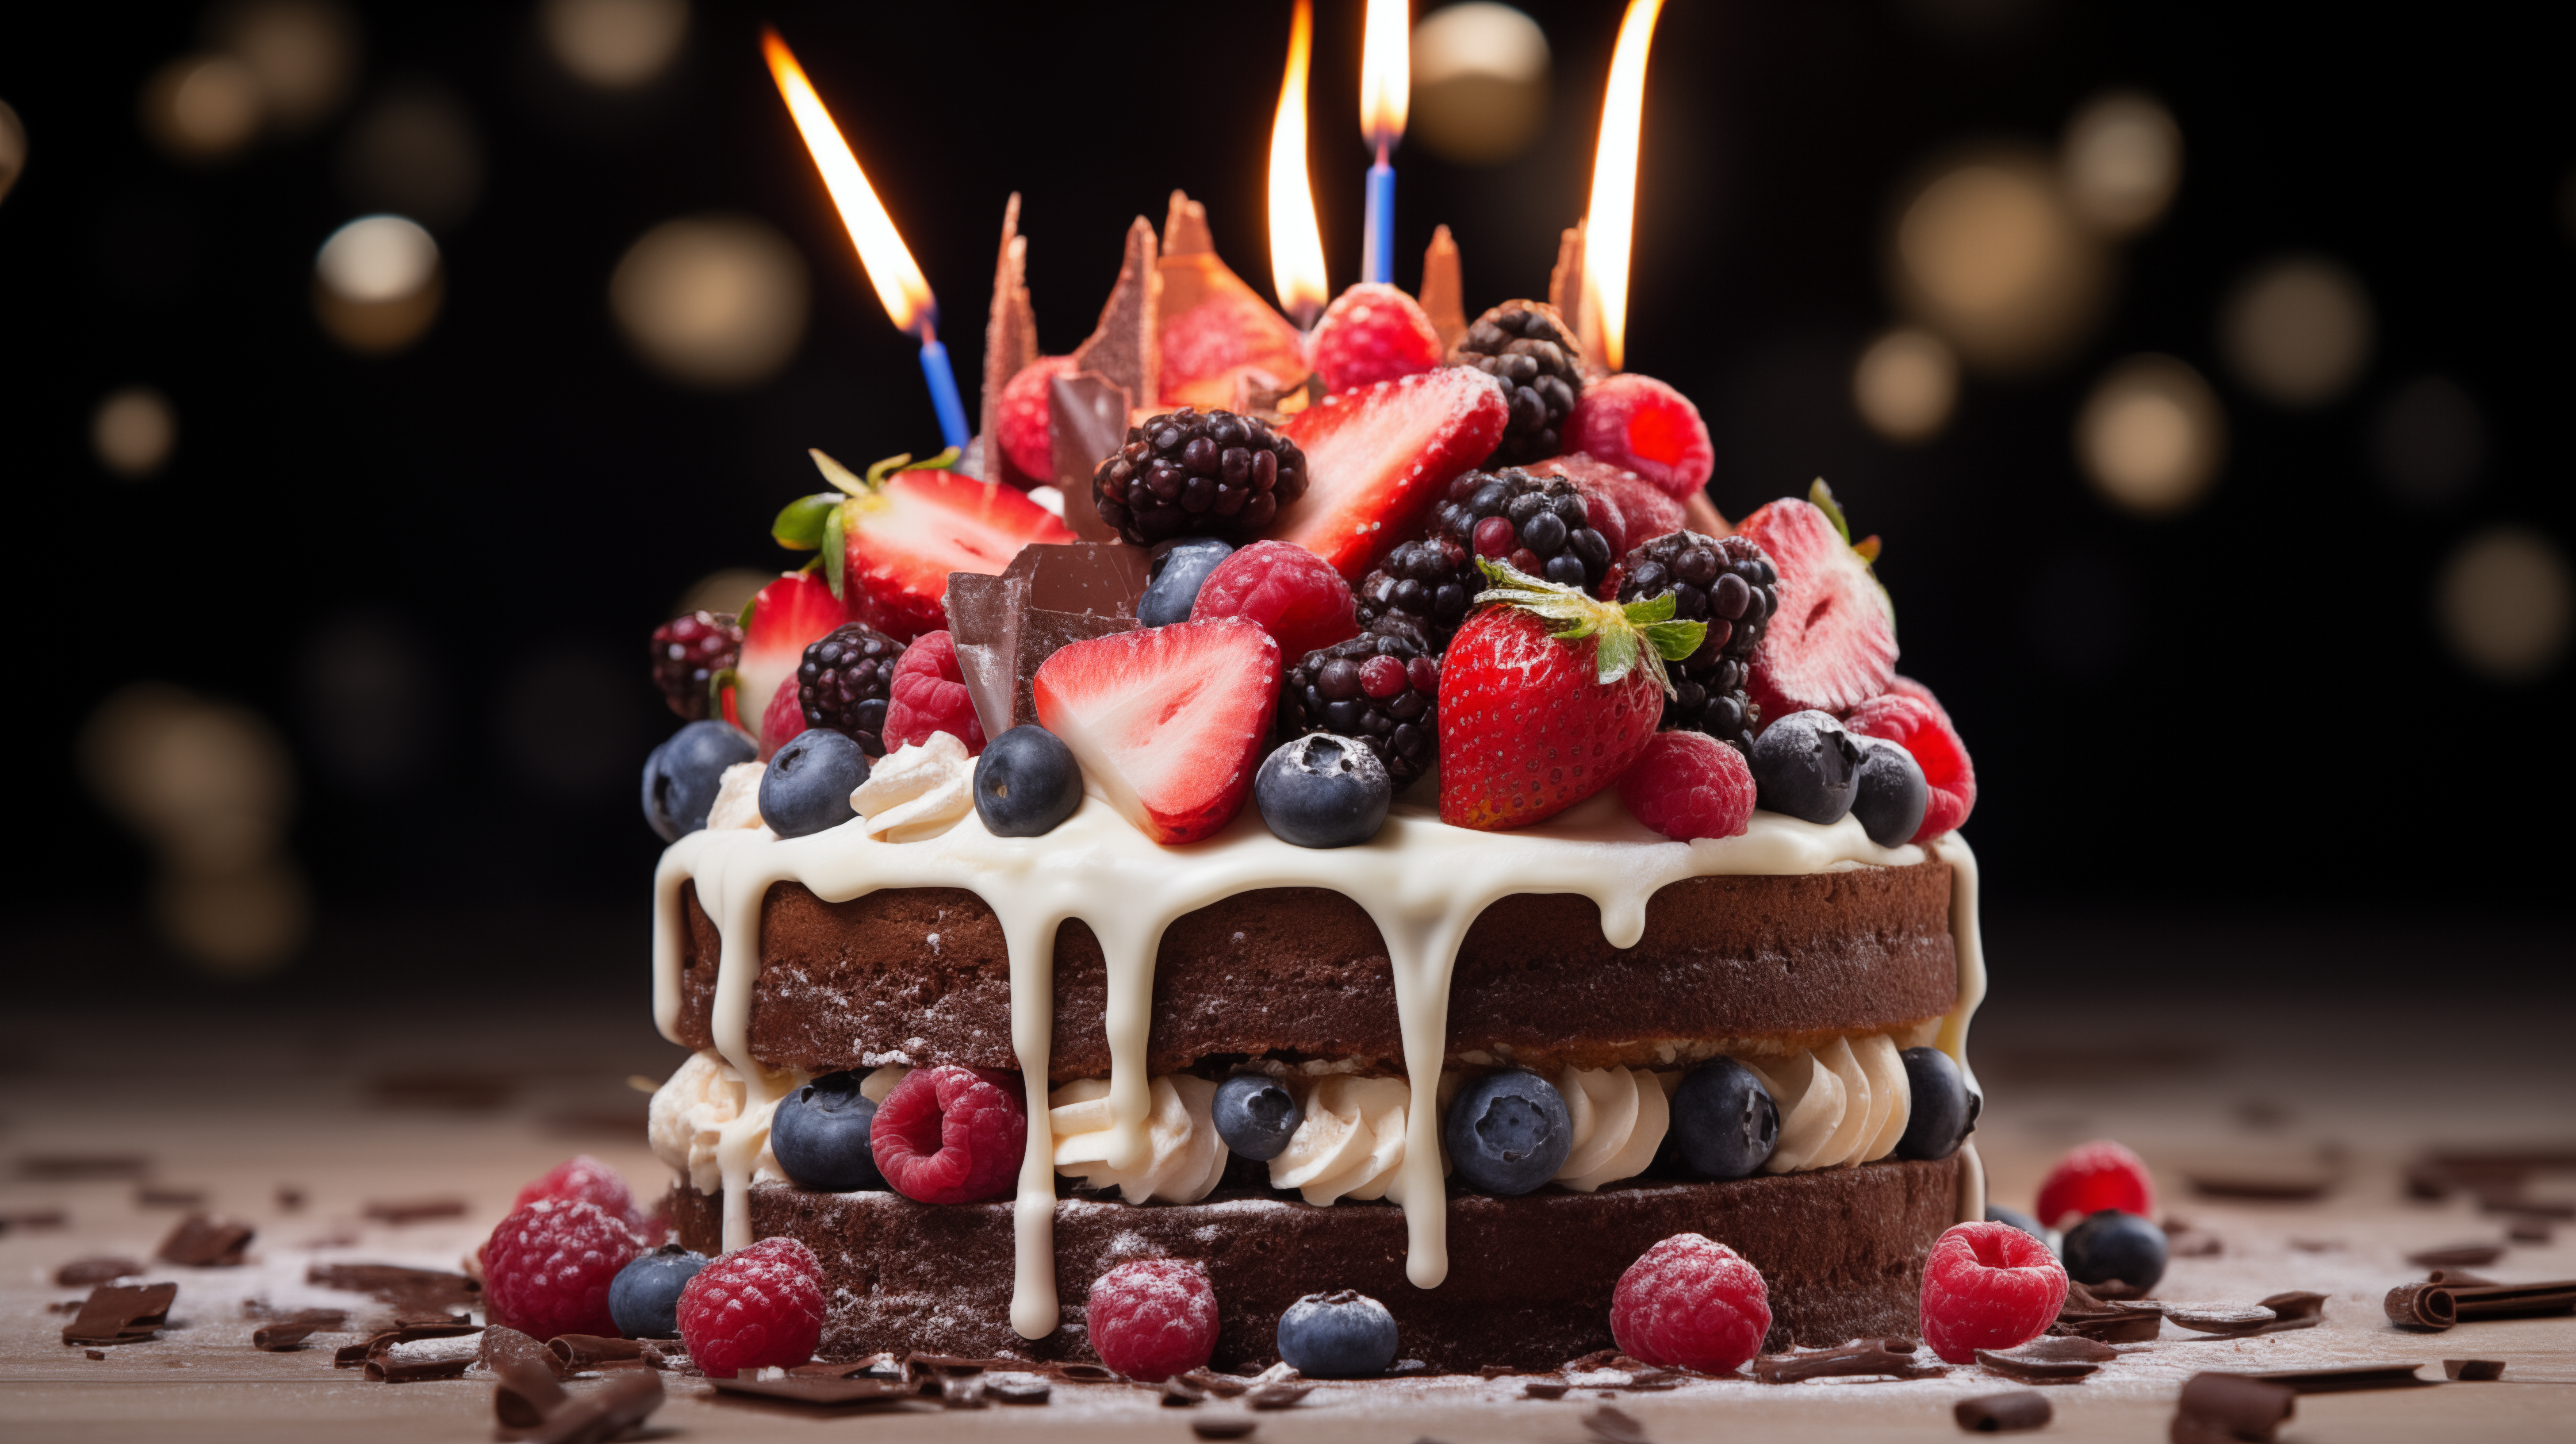 HD wallpaper of a decadent birthday cake with lit candles, topped with fresh strawberries, blueberries, and chocolate pieces, perfect for a festive desktop background.